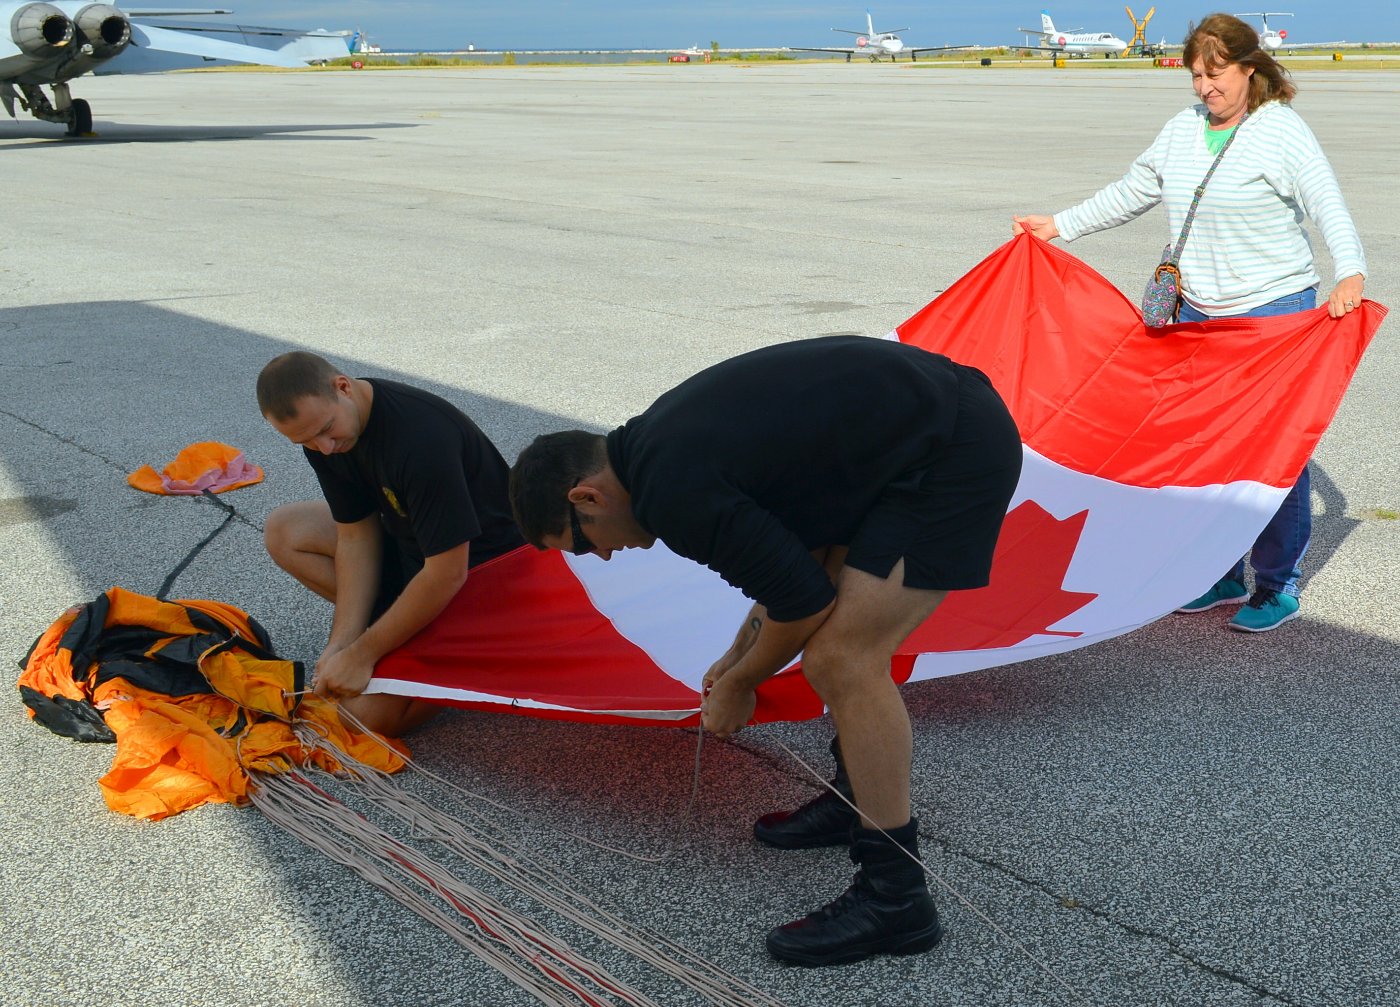 Preparing the Canadian flag for the jump.